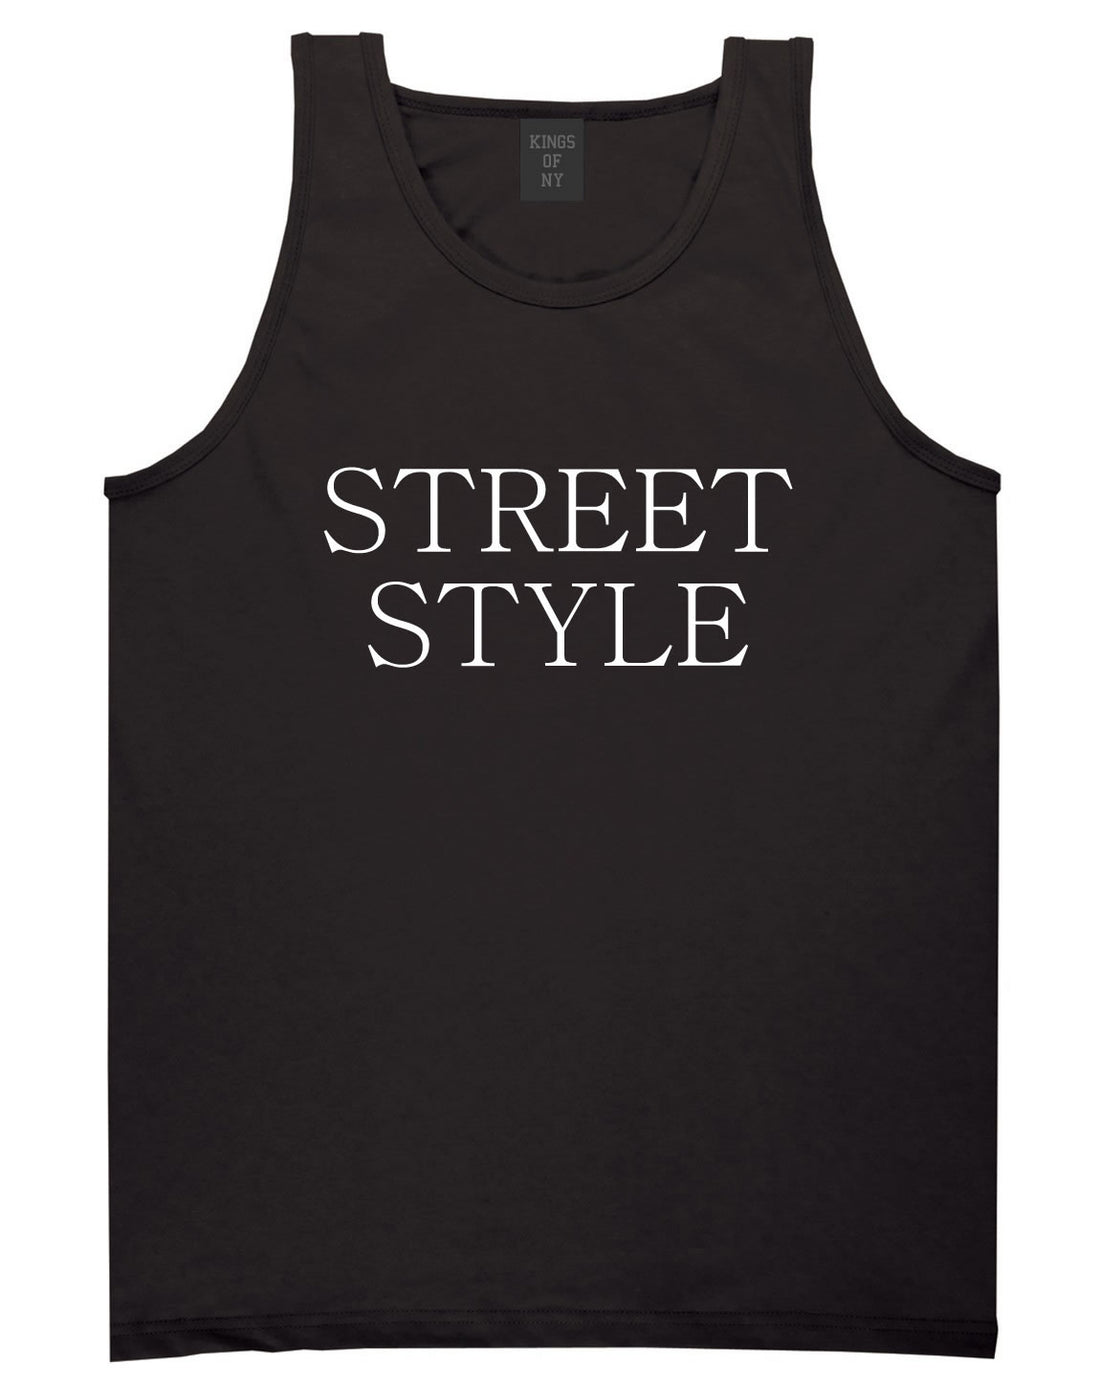 Street Style Photography Tank Top in Black by Kings Of NY